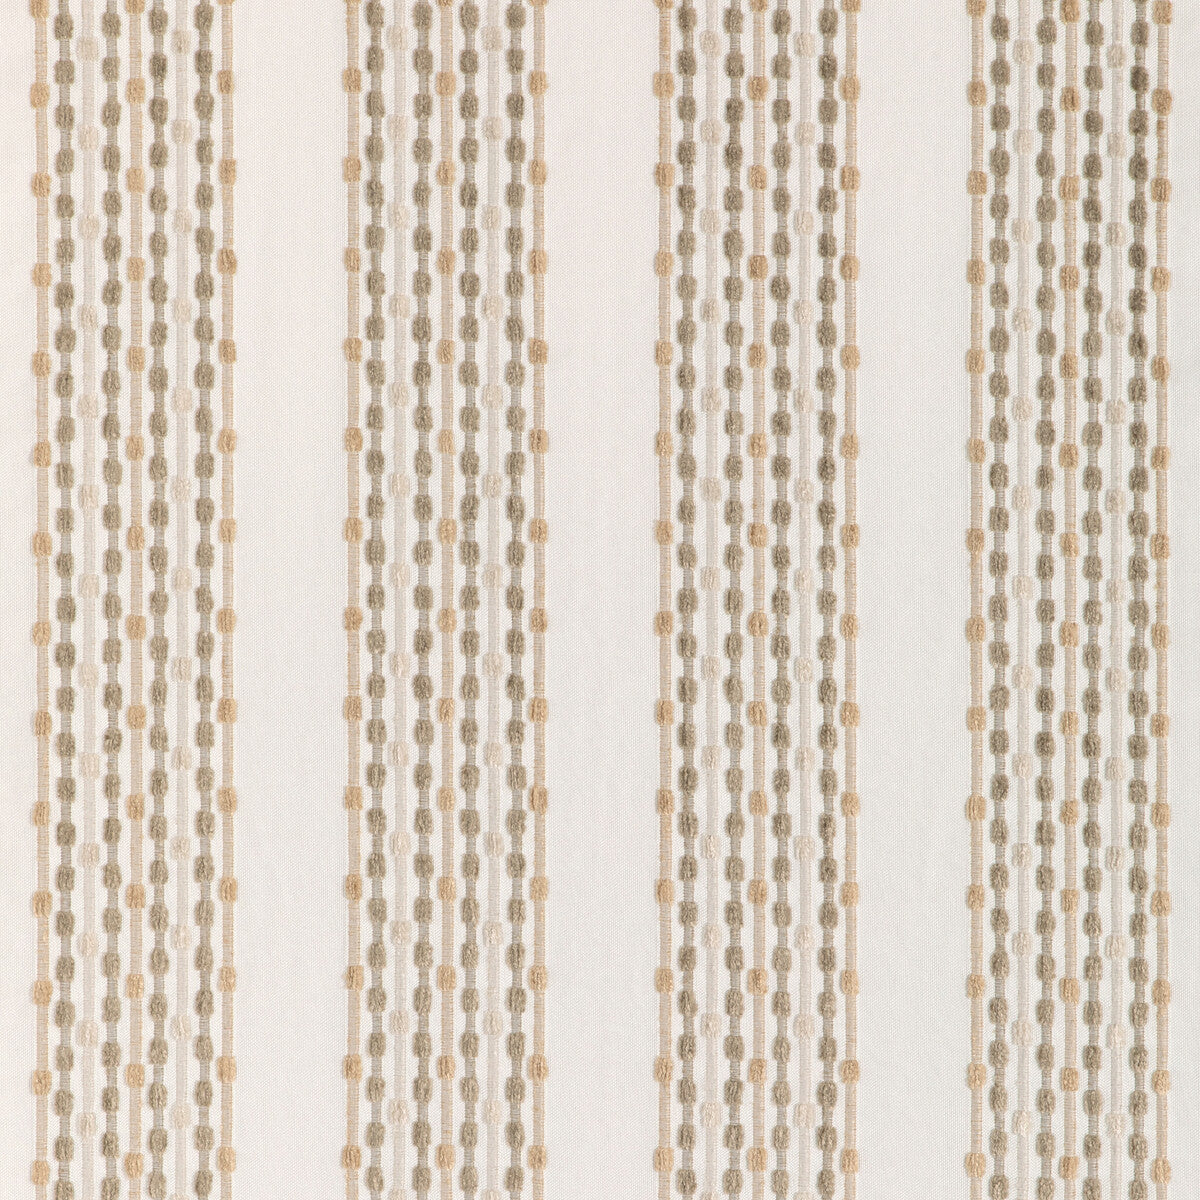 Kravet Design fabric in 37154-106 color - pattern 37154.106.0 - by Kravet Design in the Woven Colors collection